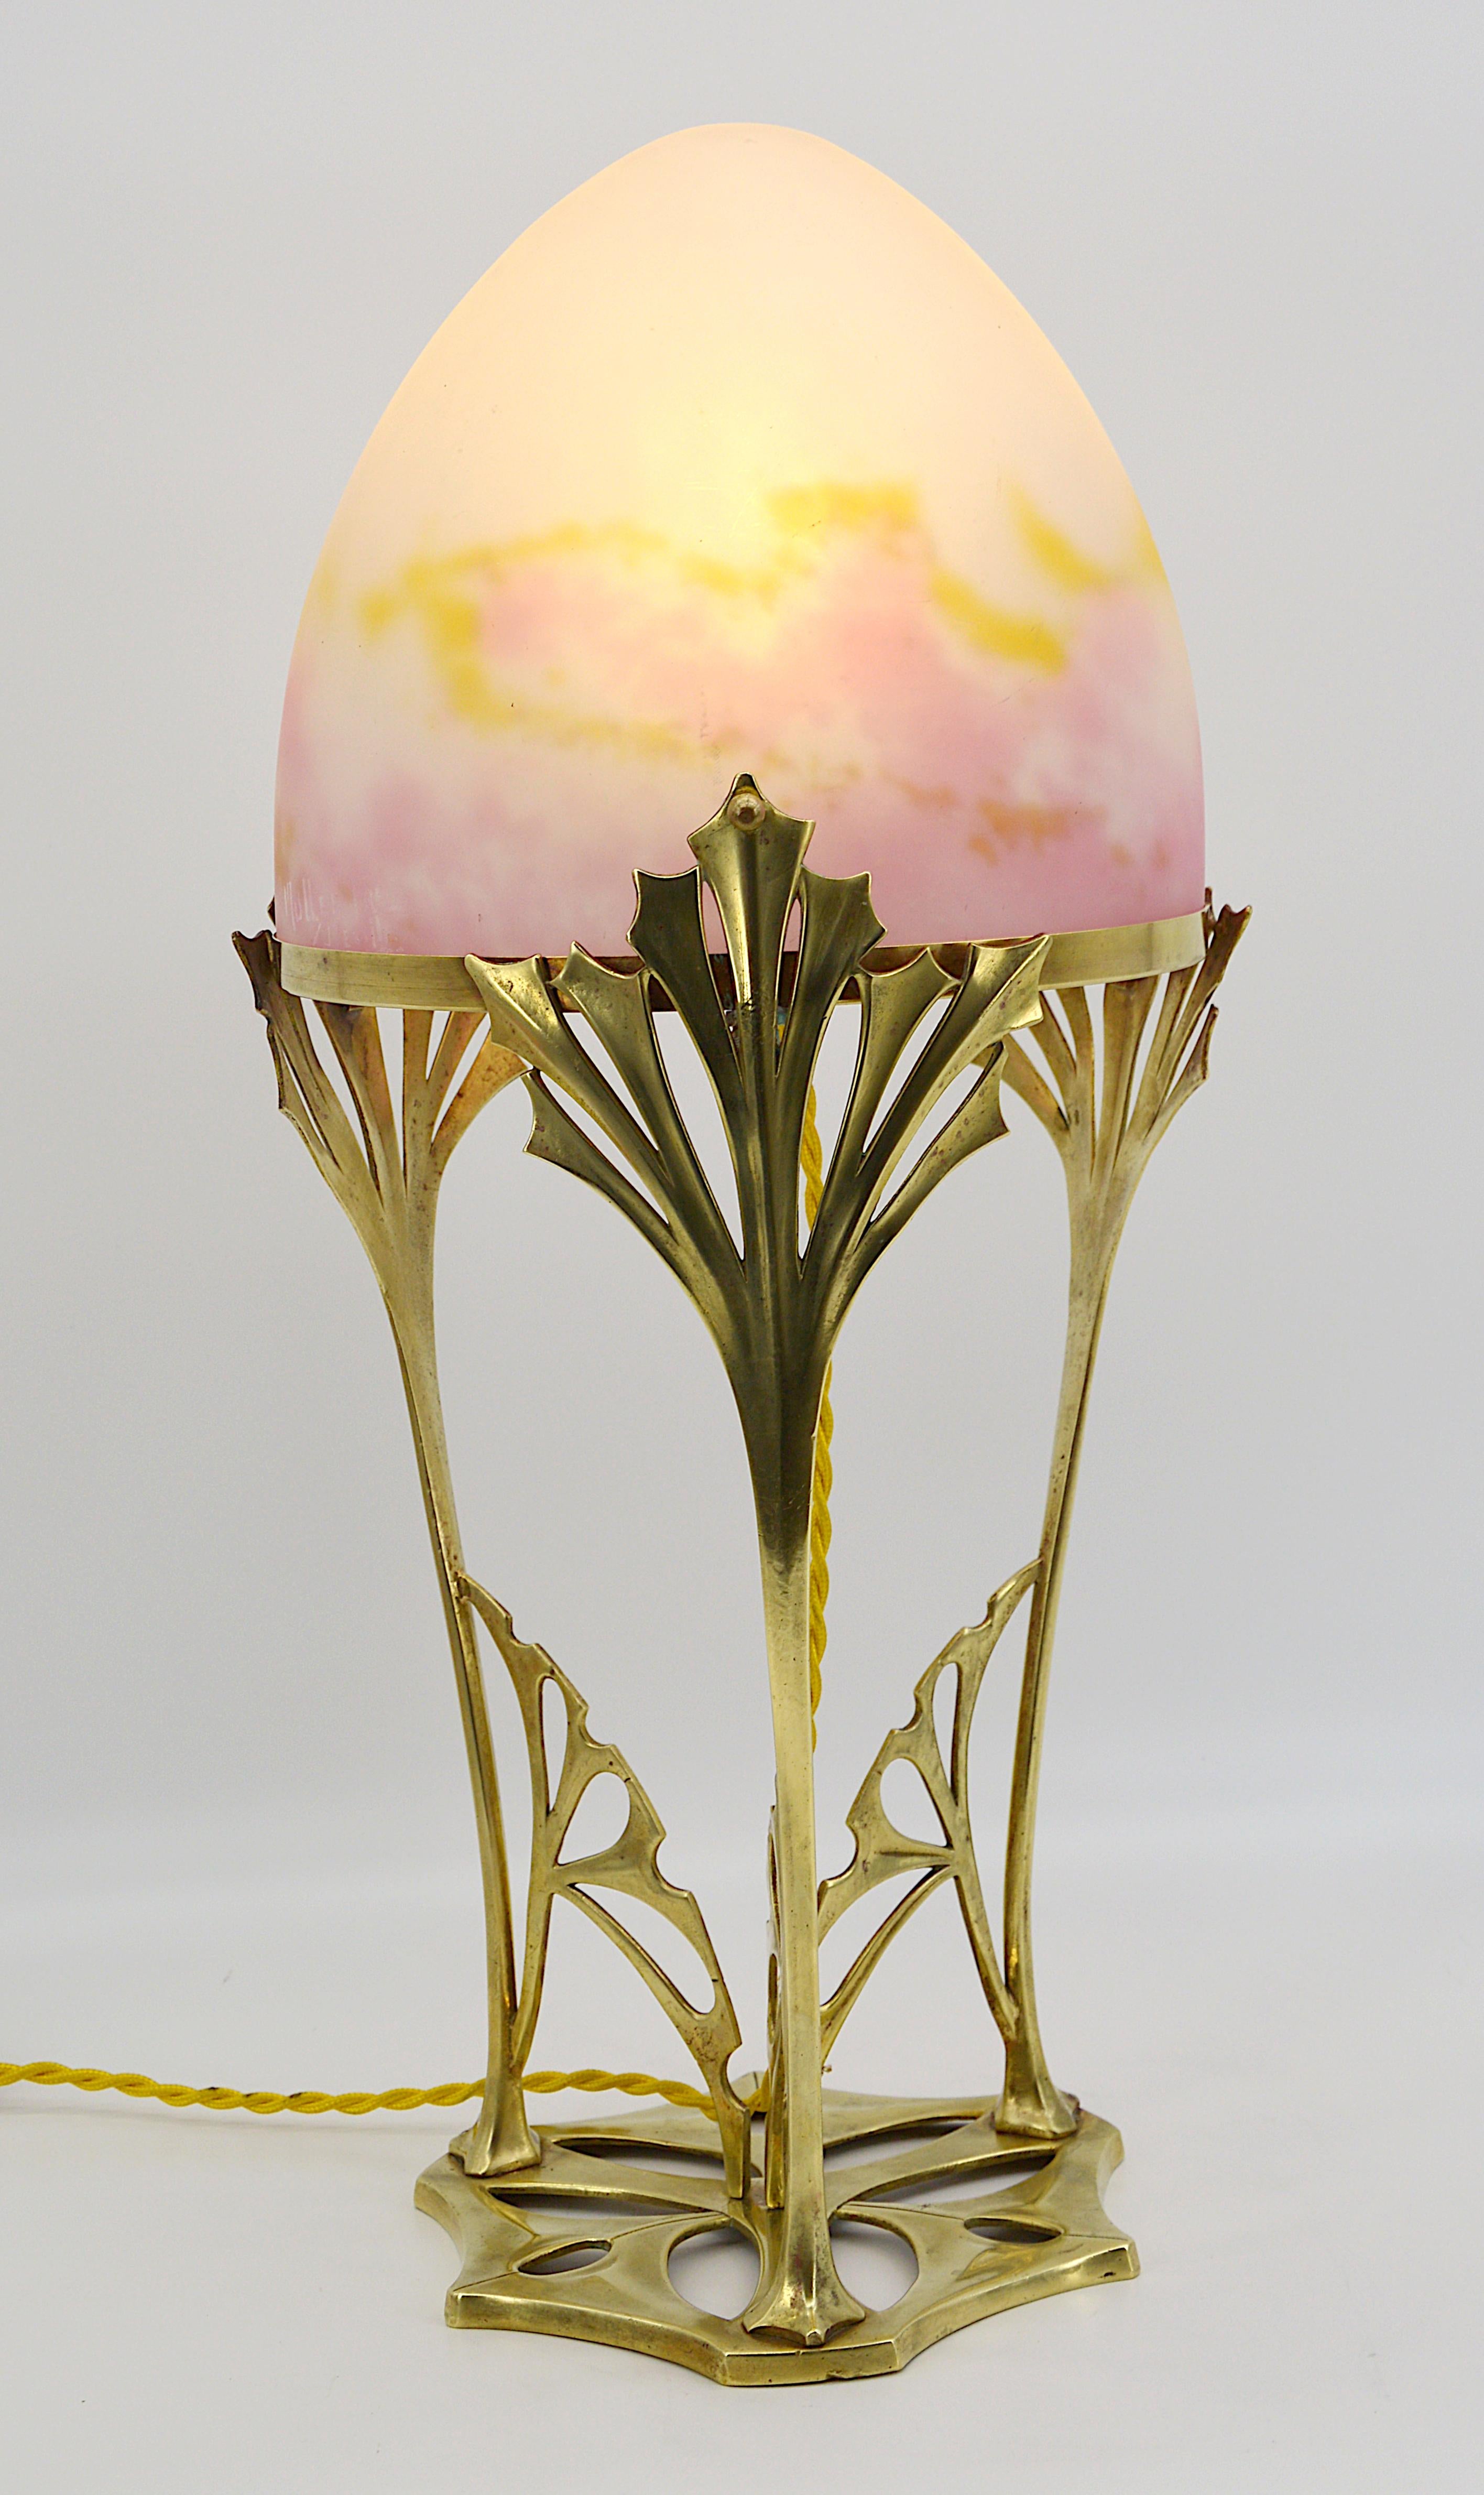 French Art Nouveau table lamp by Muller Frères, Luneville, France, 1910s. Mottled glass shade, powders are applied between two layers that comes on its bronze base. Colors: pink, ochre/yellow and white. Measures: Height 17.9